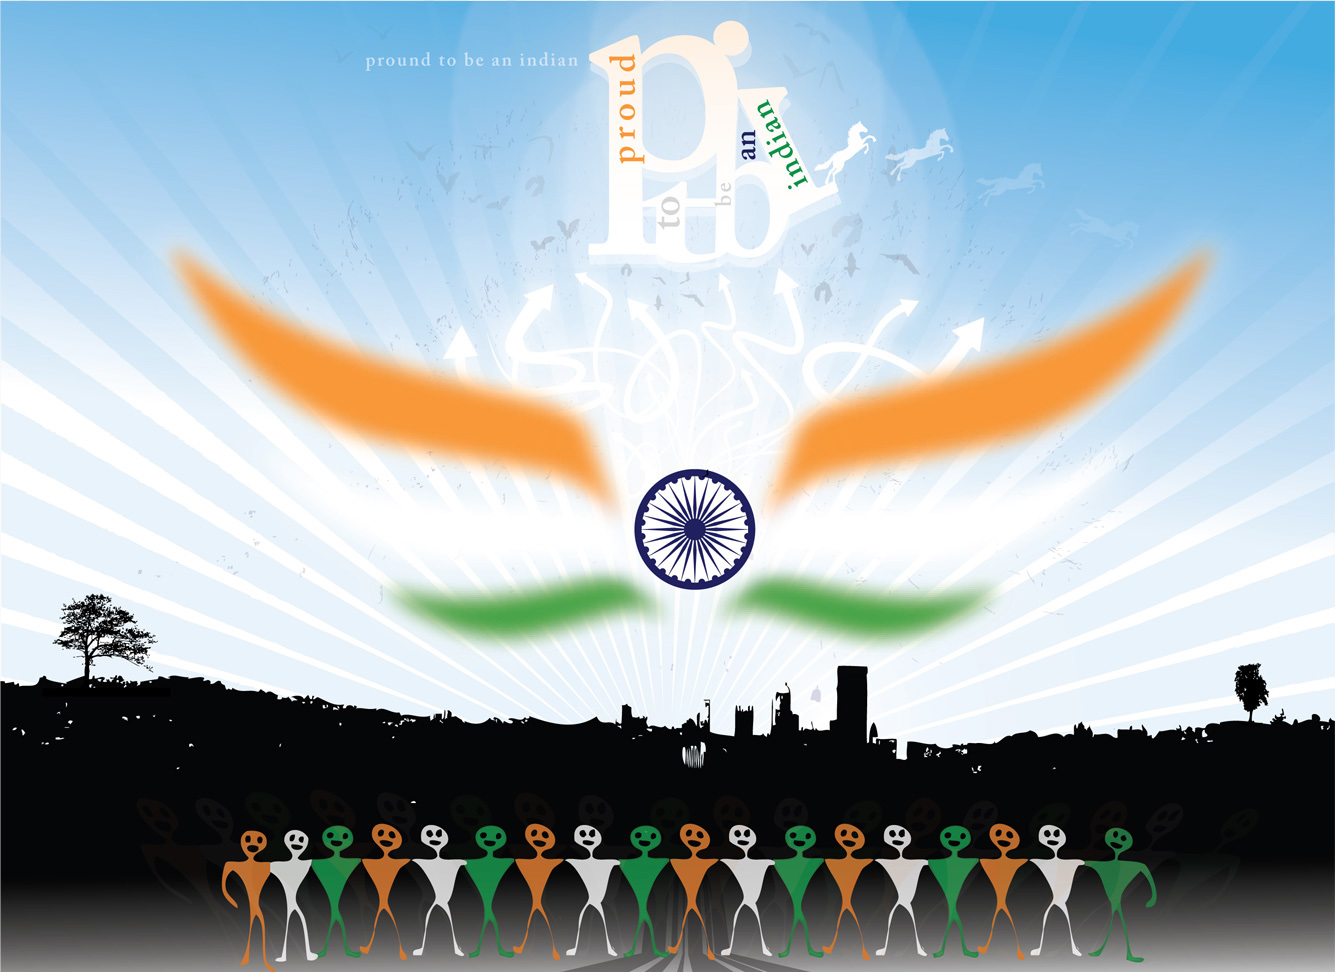 india flag wallpapers,team,competition event,basketball,graphic design,games